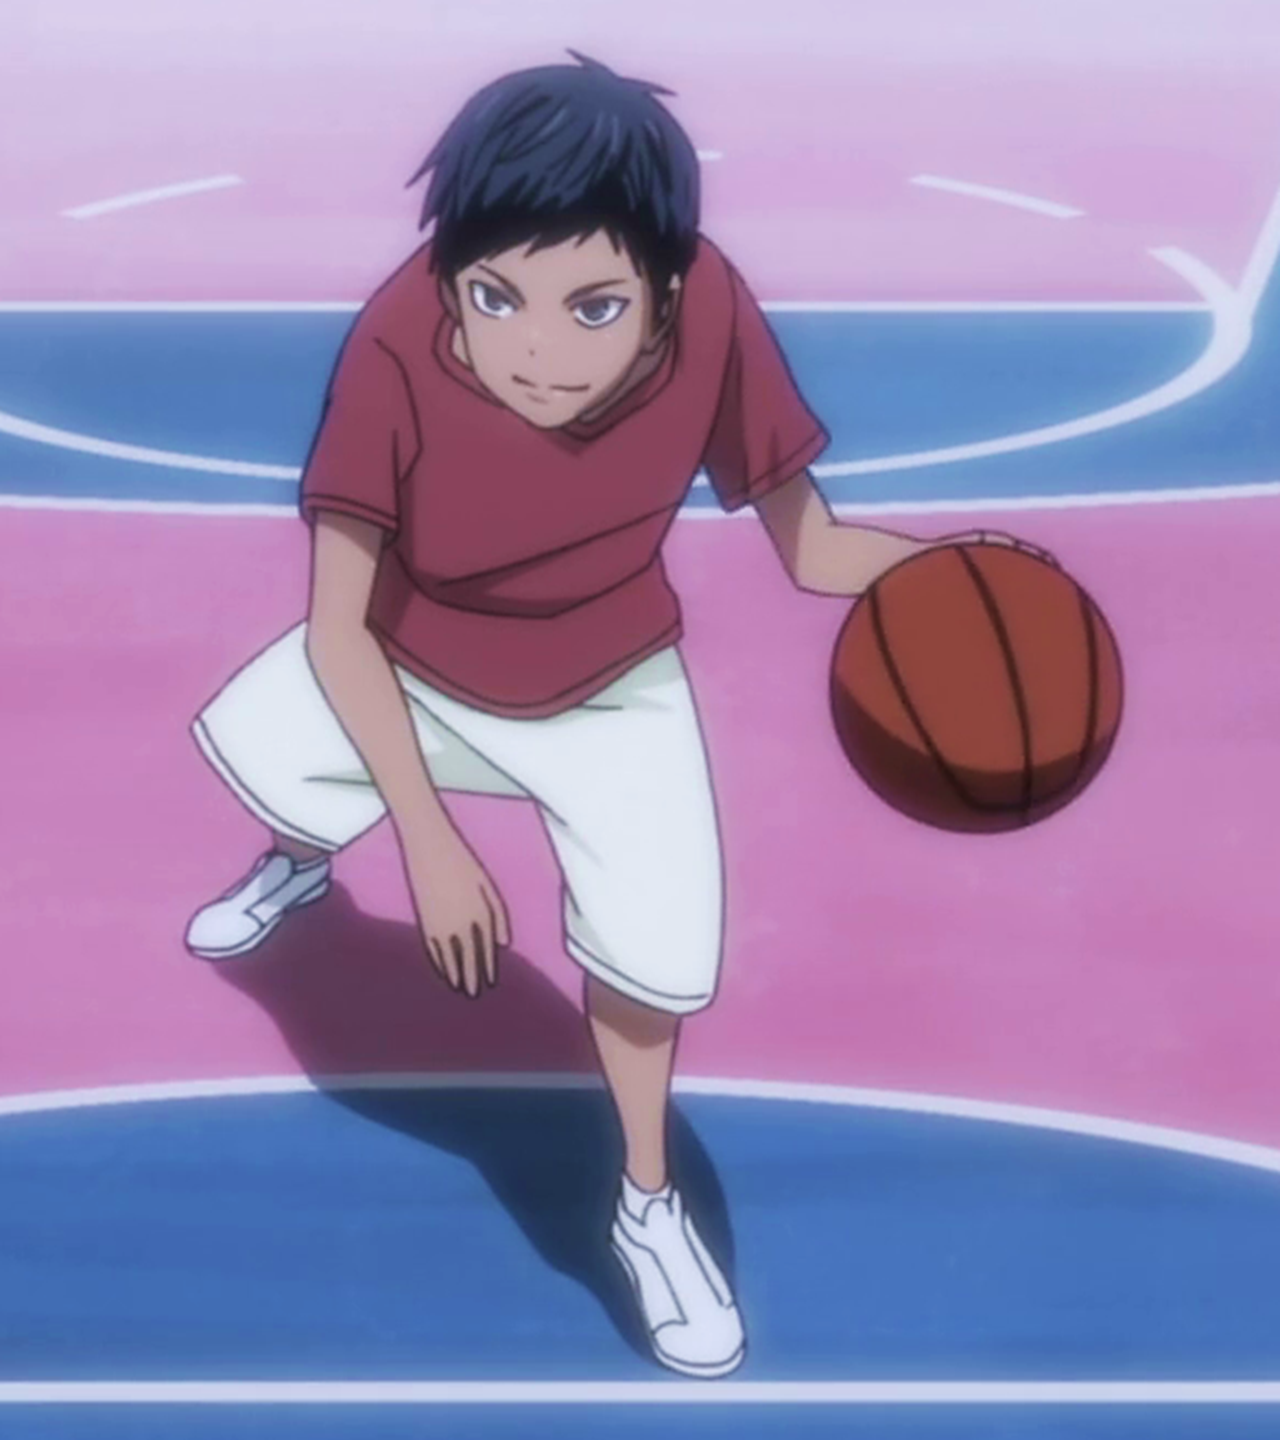 nitroid – If Aomine and Kise had a teenage son, he'd be